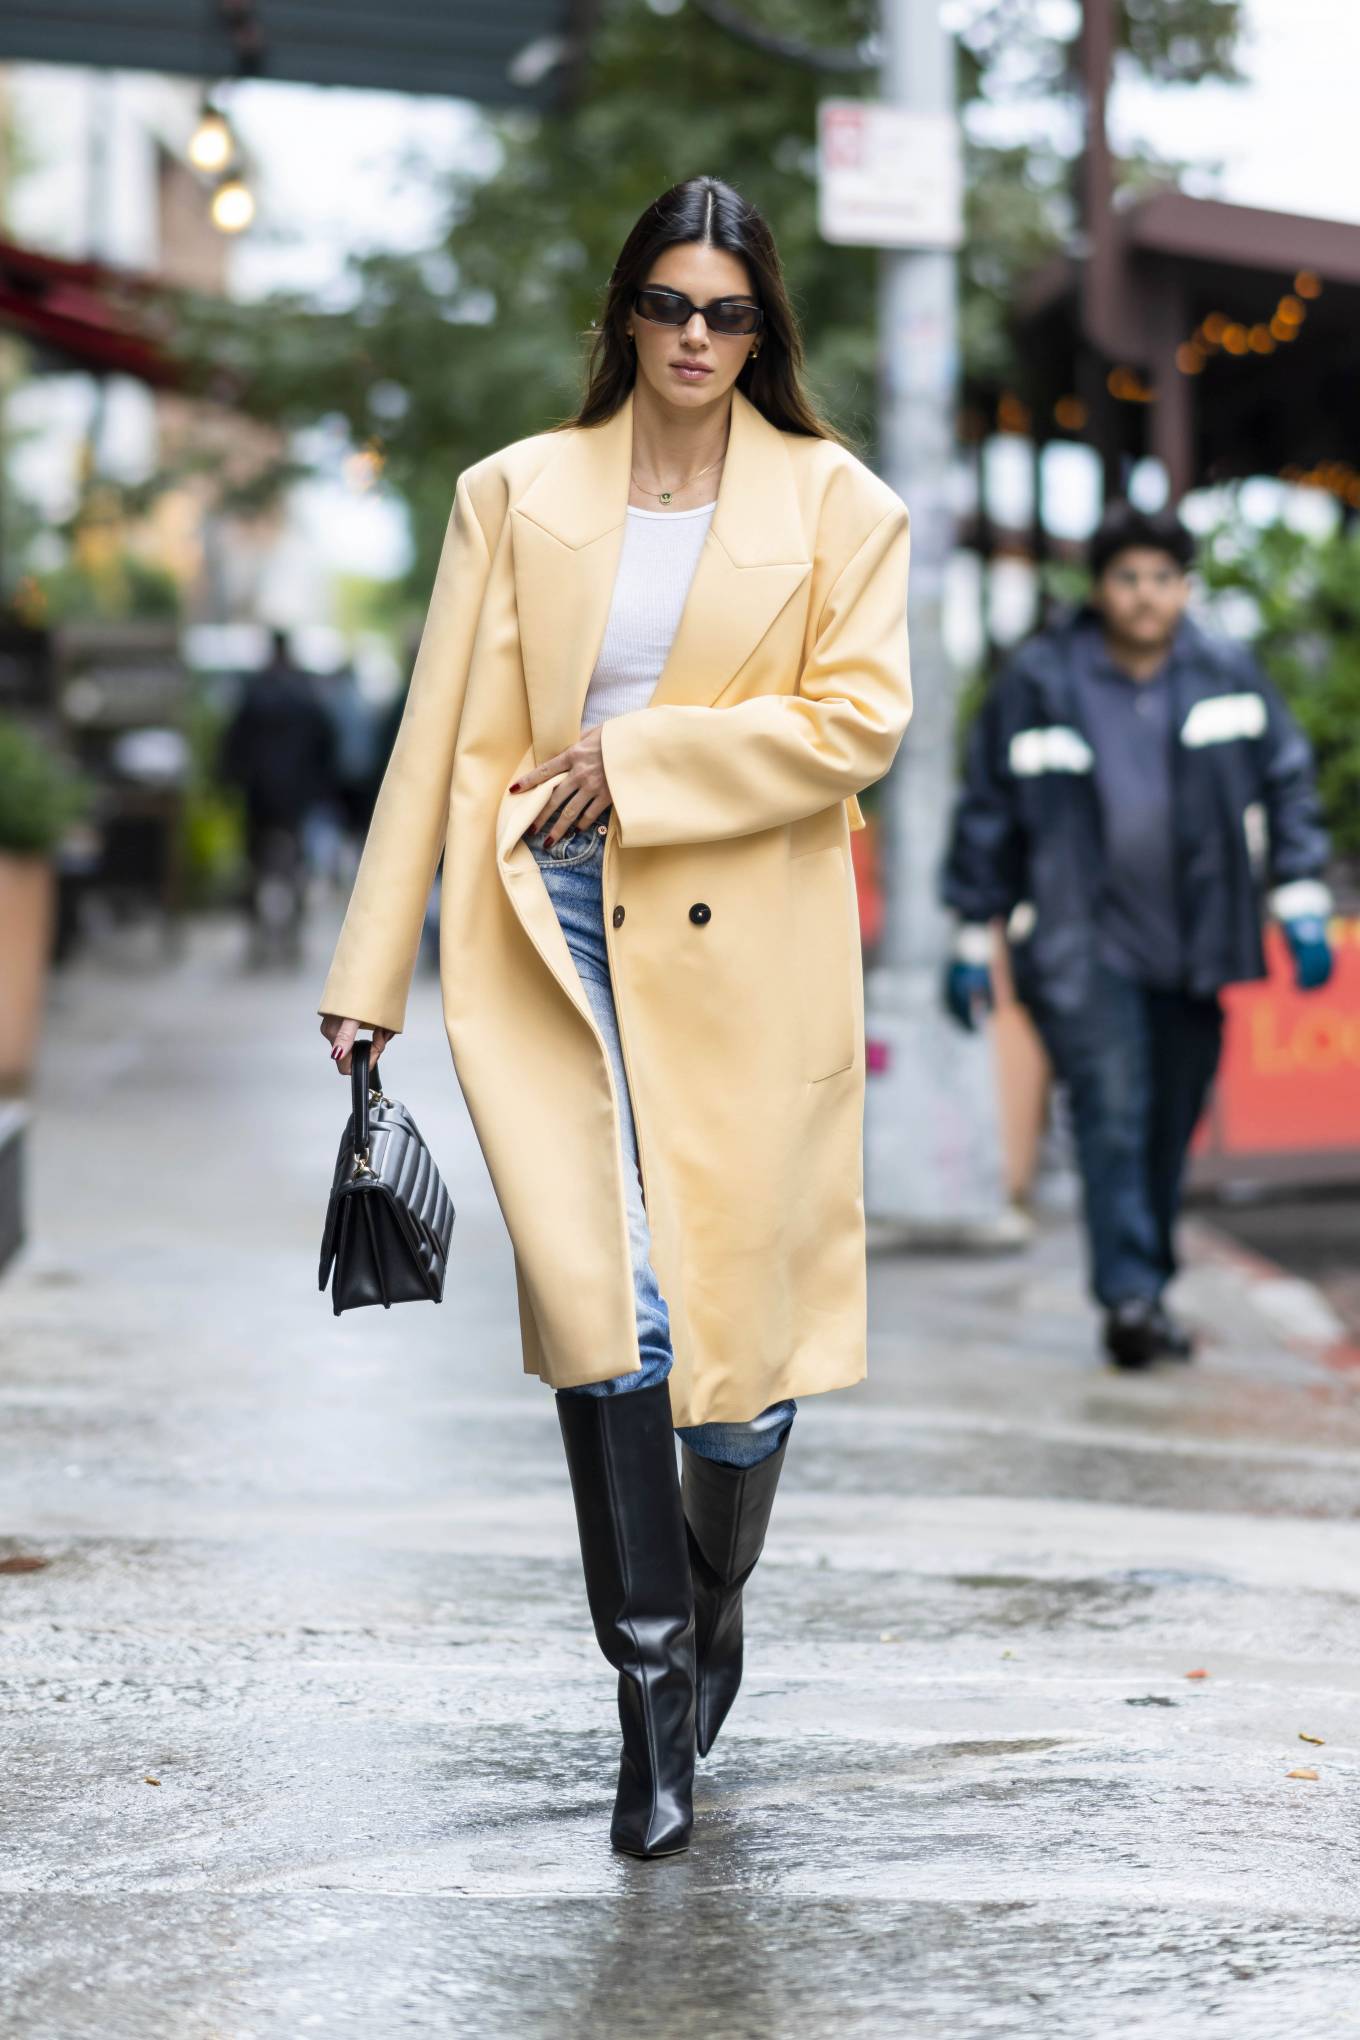 Kendall Jenner 2022 : Kendall Jenner – Out in New York-06